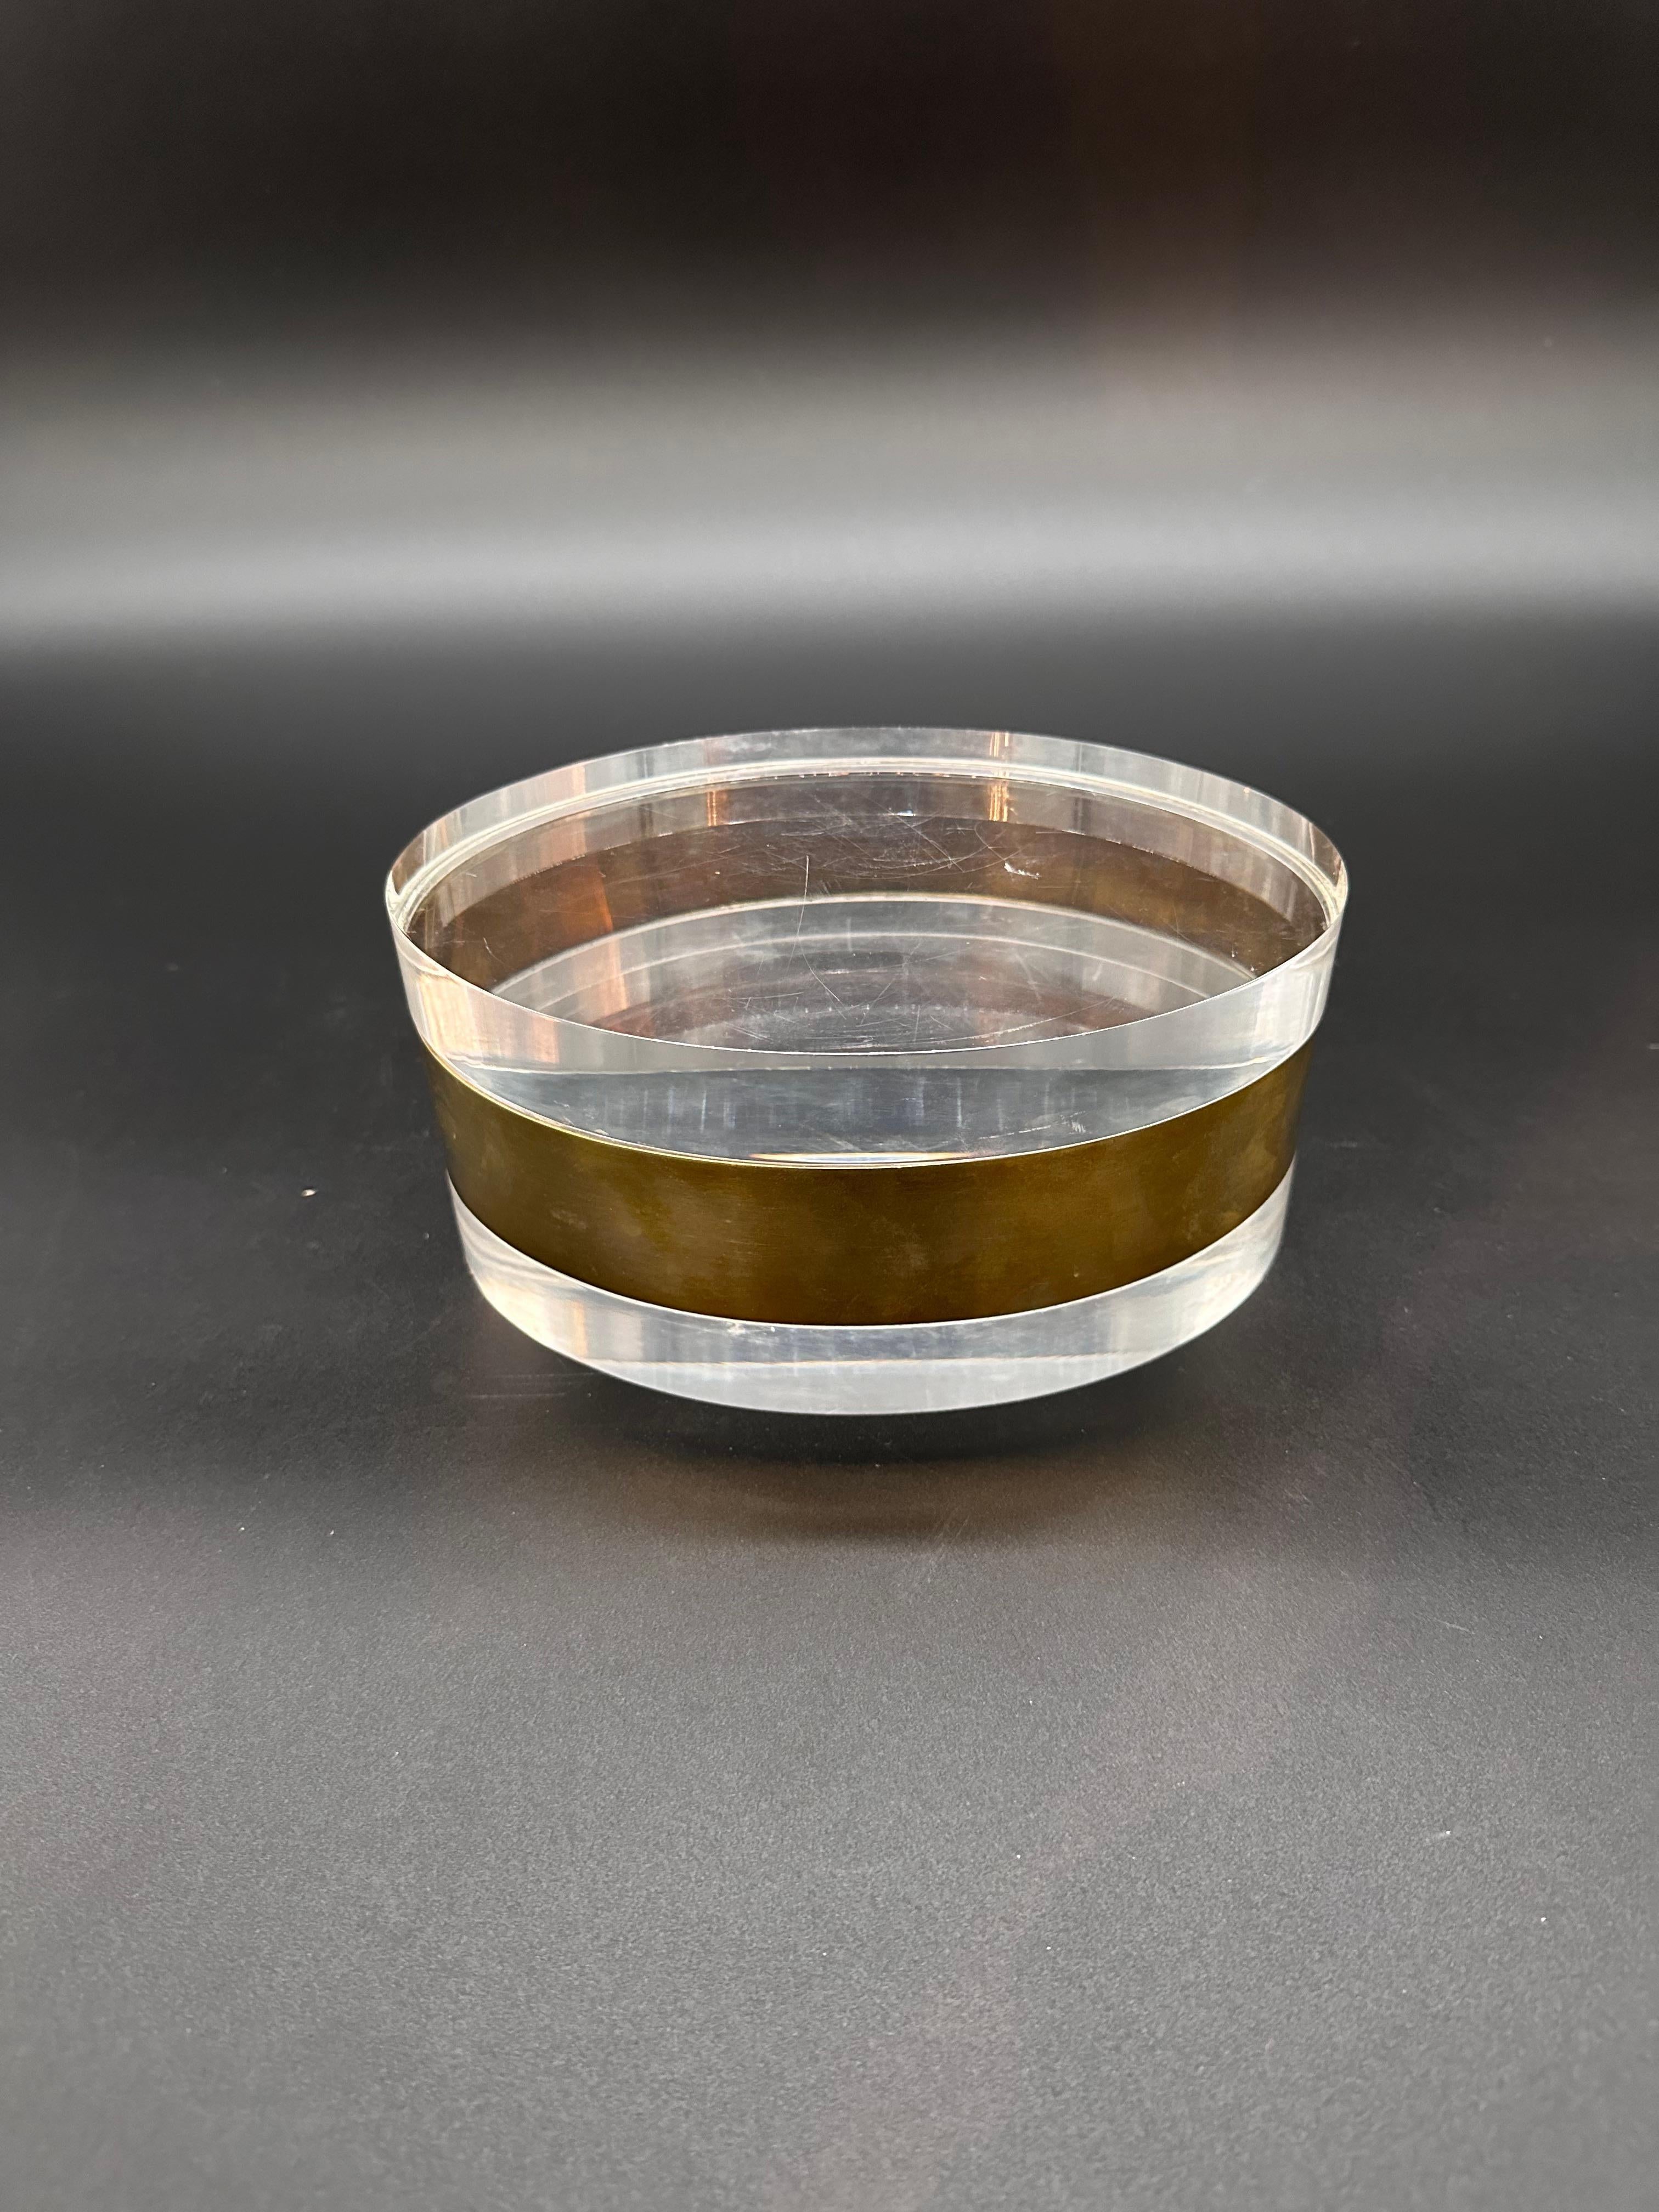 The Vintage Oval Italian Plexiglass and Brass Decorative Box from the 1980s is a captivating blend of elegance and sophistication. Crafted with a combination of luxurious plexiglass and brass, this box showcases the exquisite craftsmanship